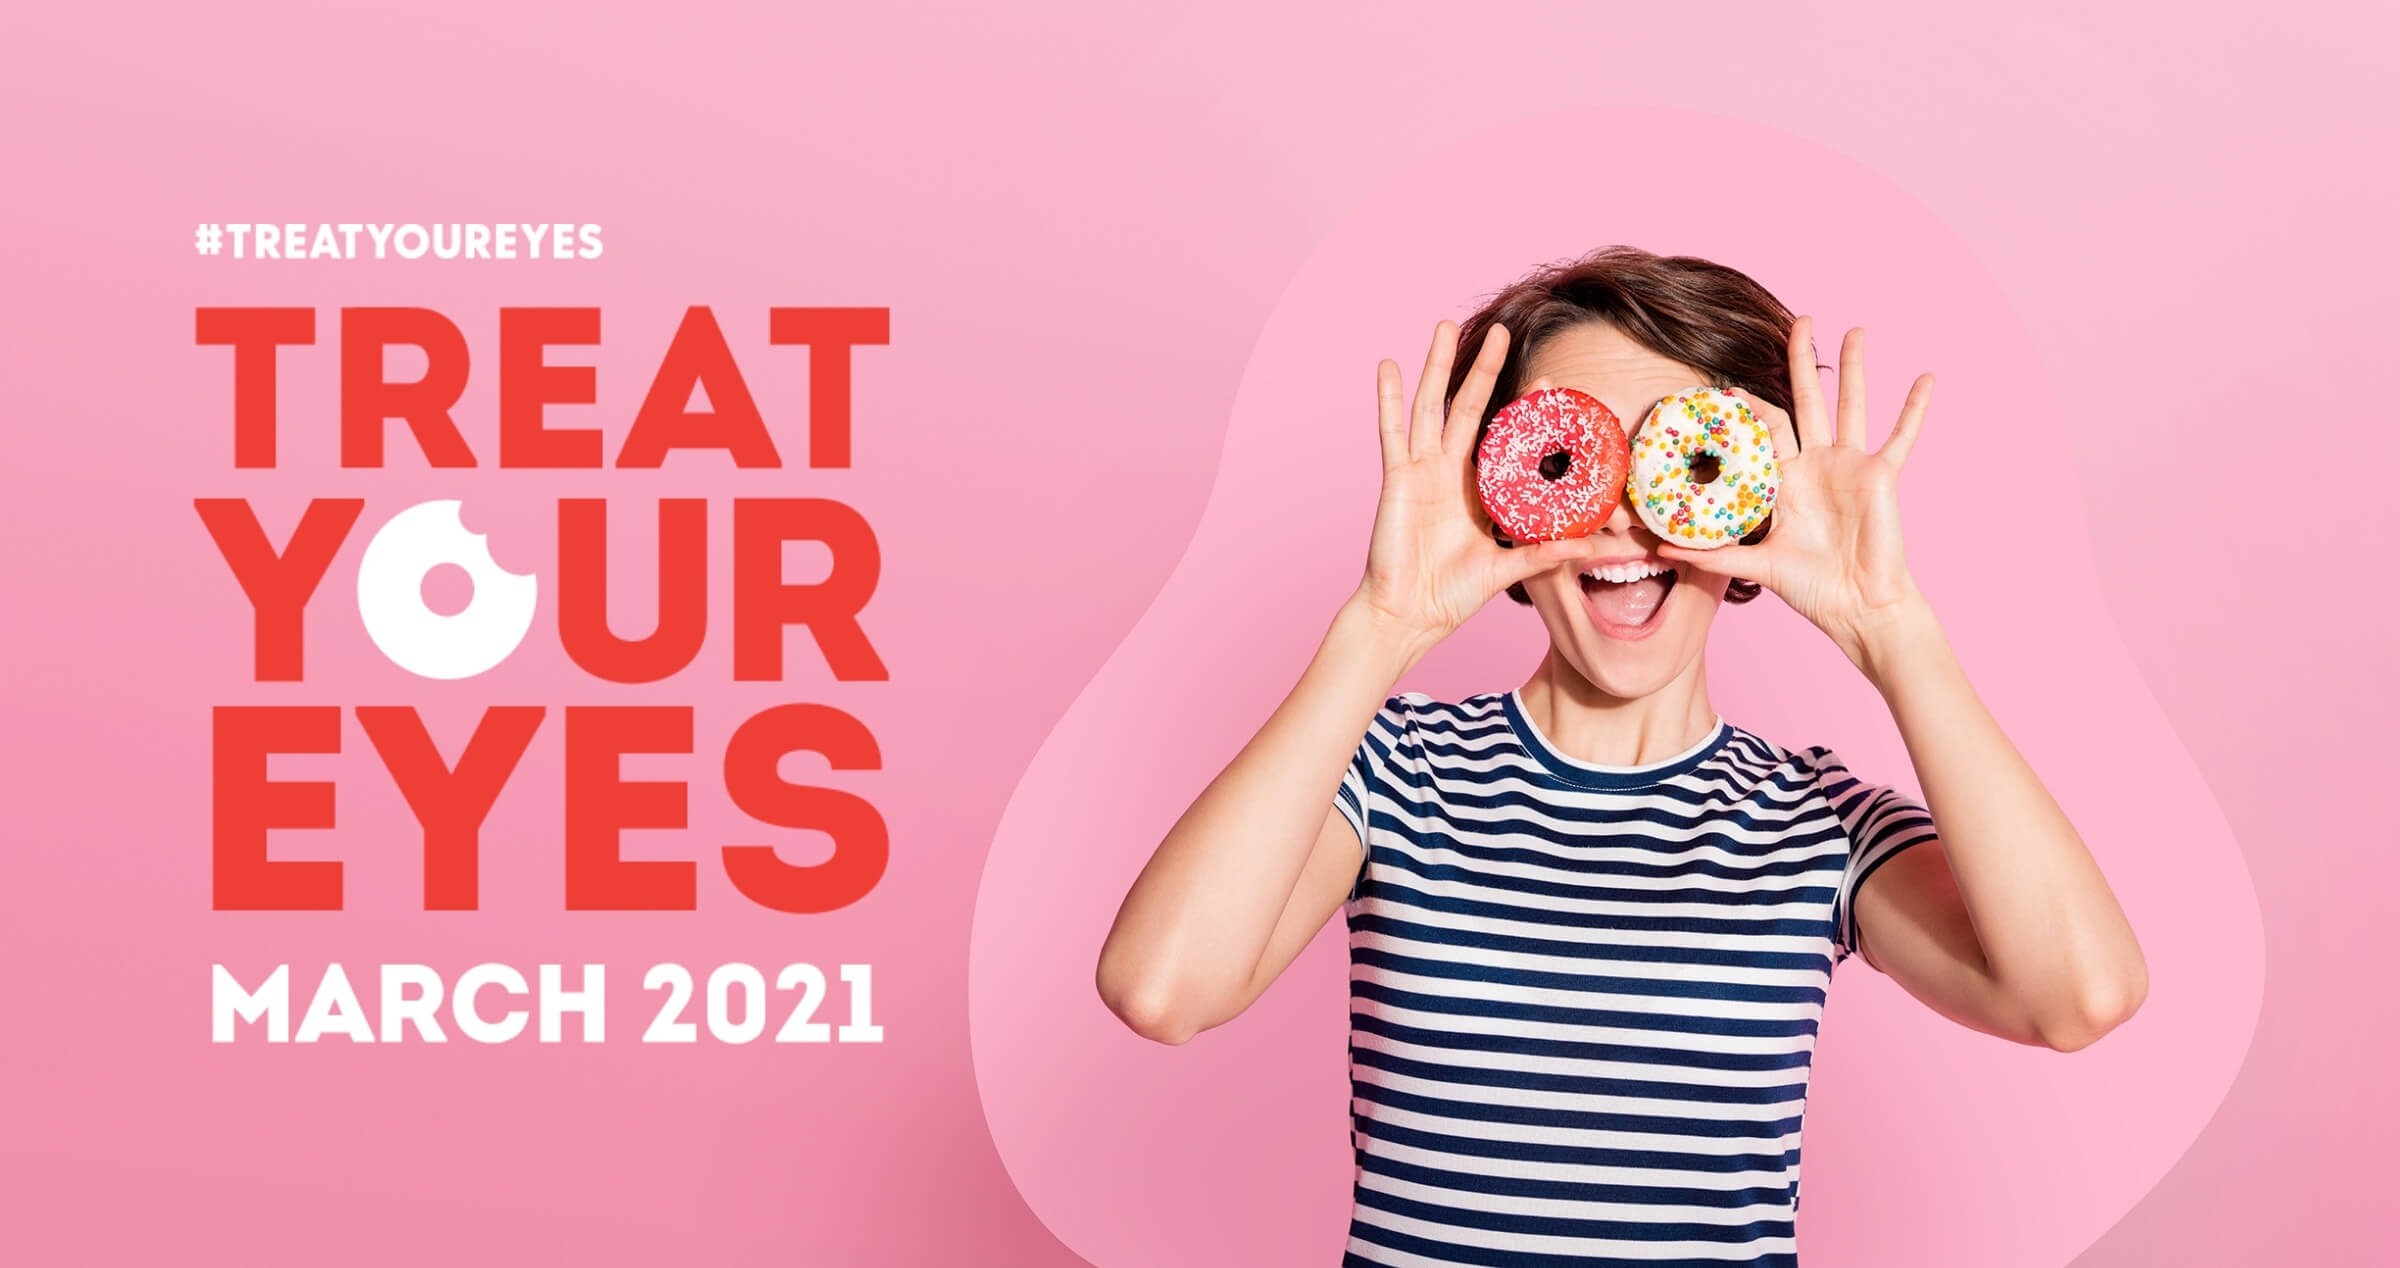 Image of woman holding up iced donuts over her eyes and smiling